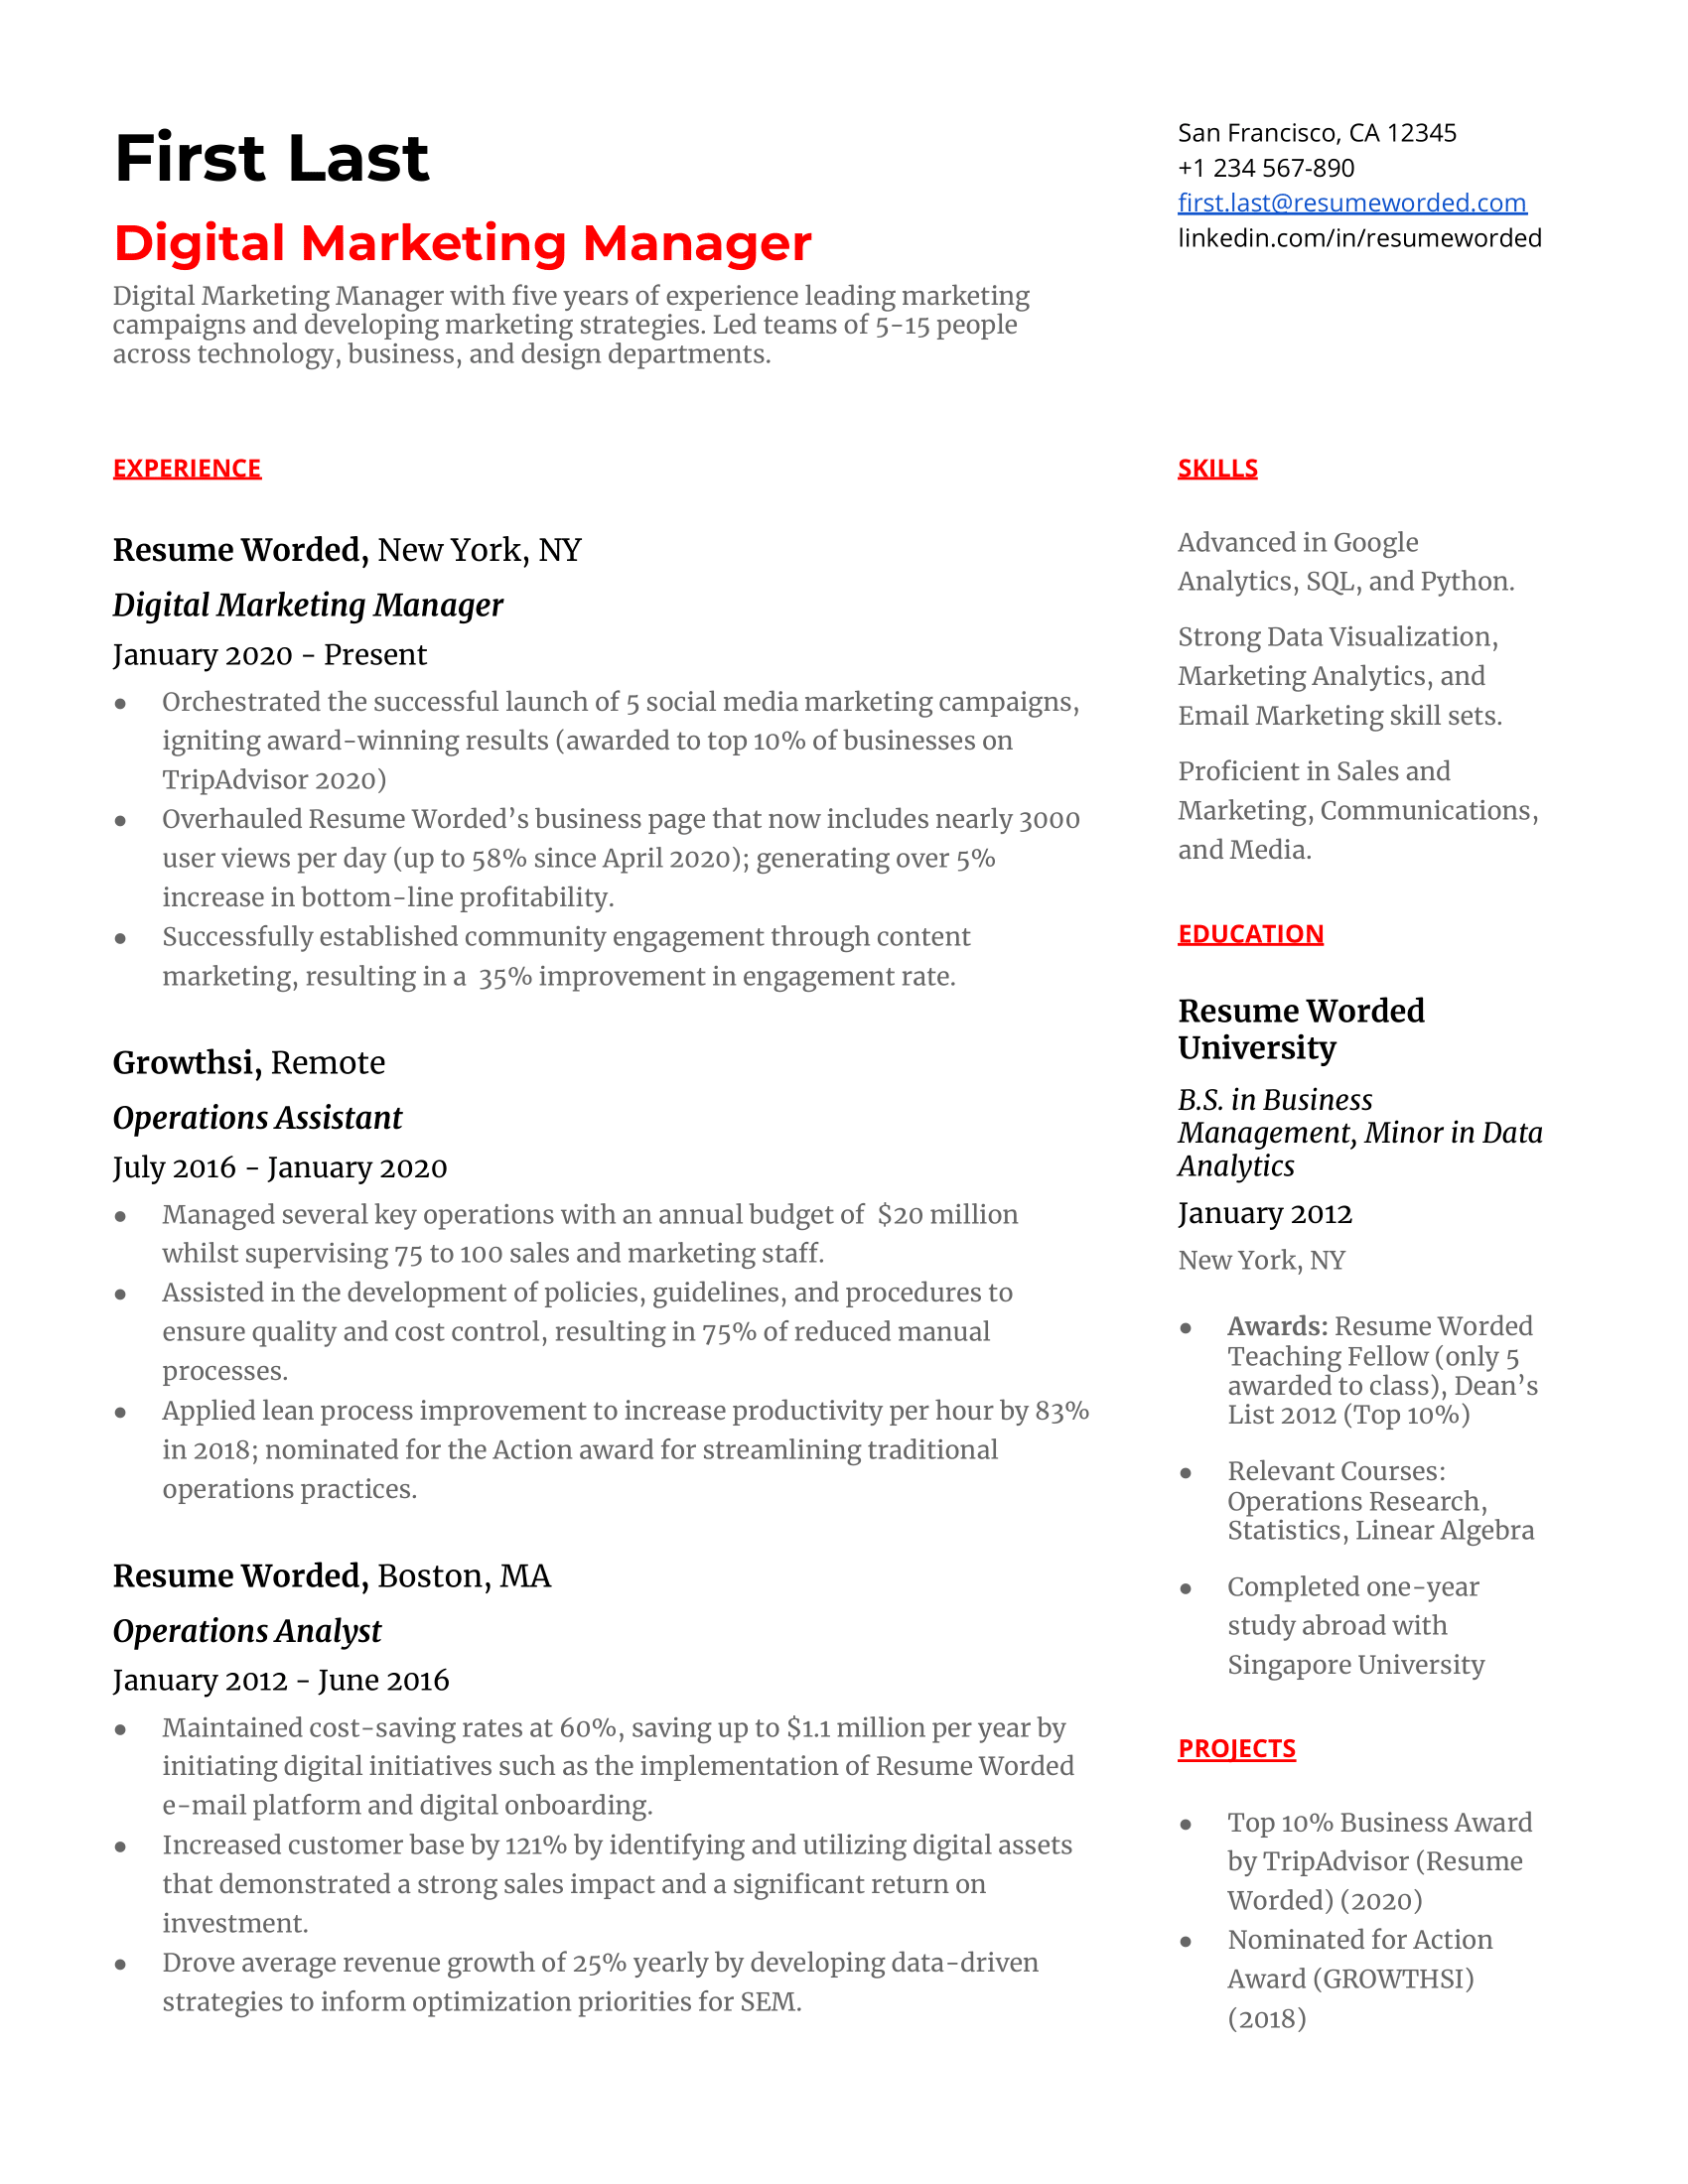 A digital marketing manager resume template using strong action verbs. 